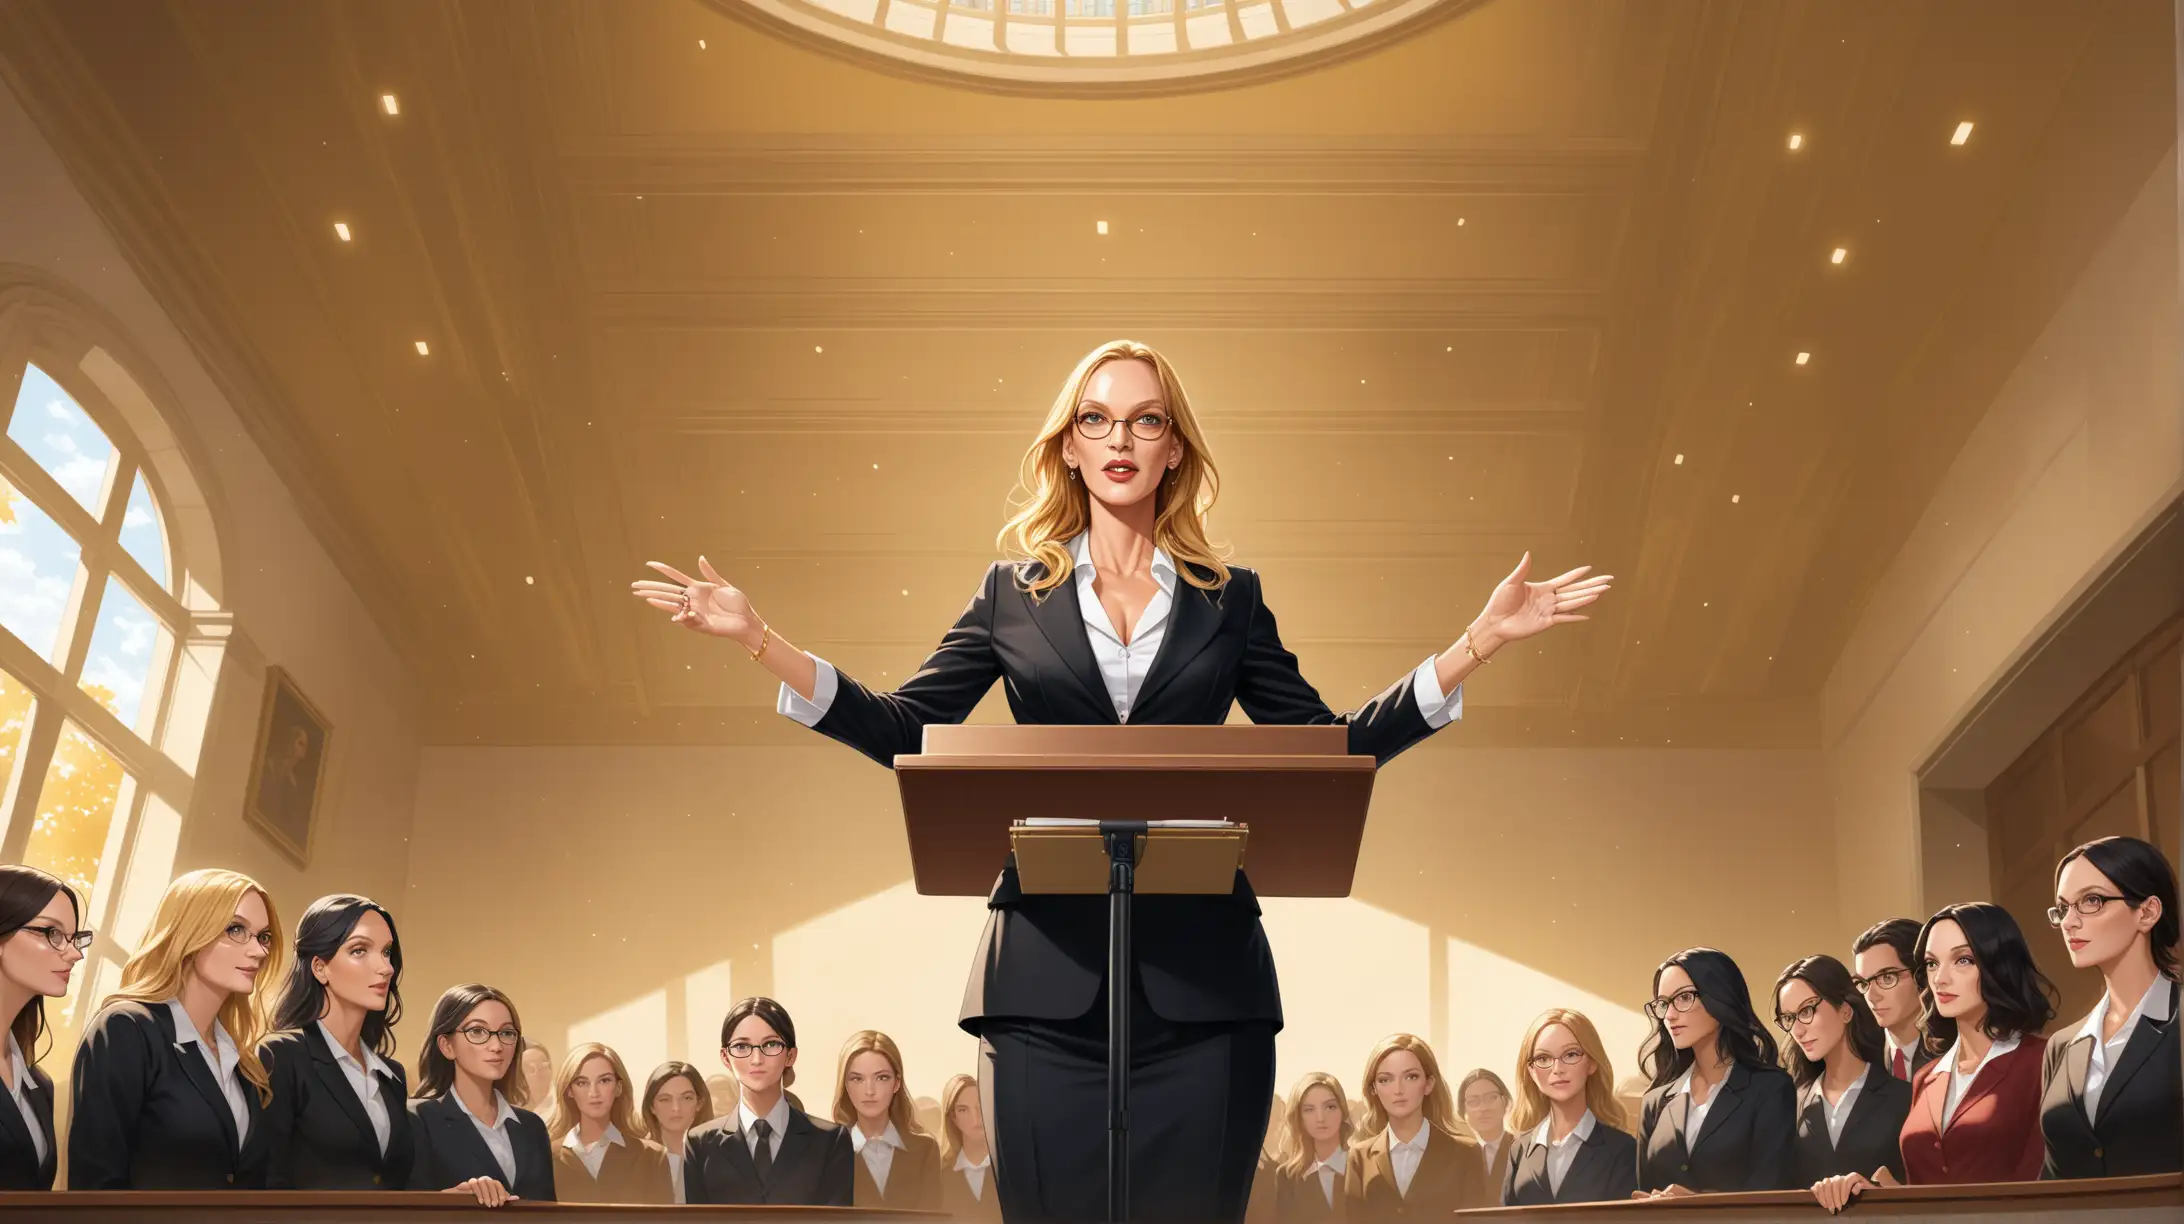 American university campus, 50-year-old Uma Thurman, female teacher, at the lecture podium giving students a lecture. Fitness woman suit and high heels, gold-rimmed glasses. Tall, confident, clear facial details and wrinkles, 32K wallpaper, wide-angle lens, European-American painting style